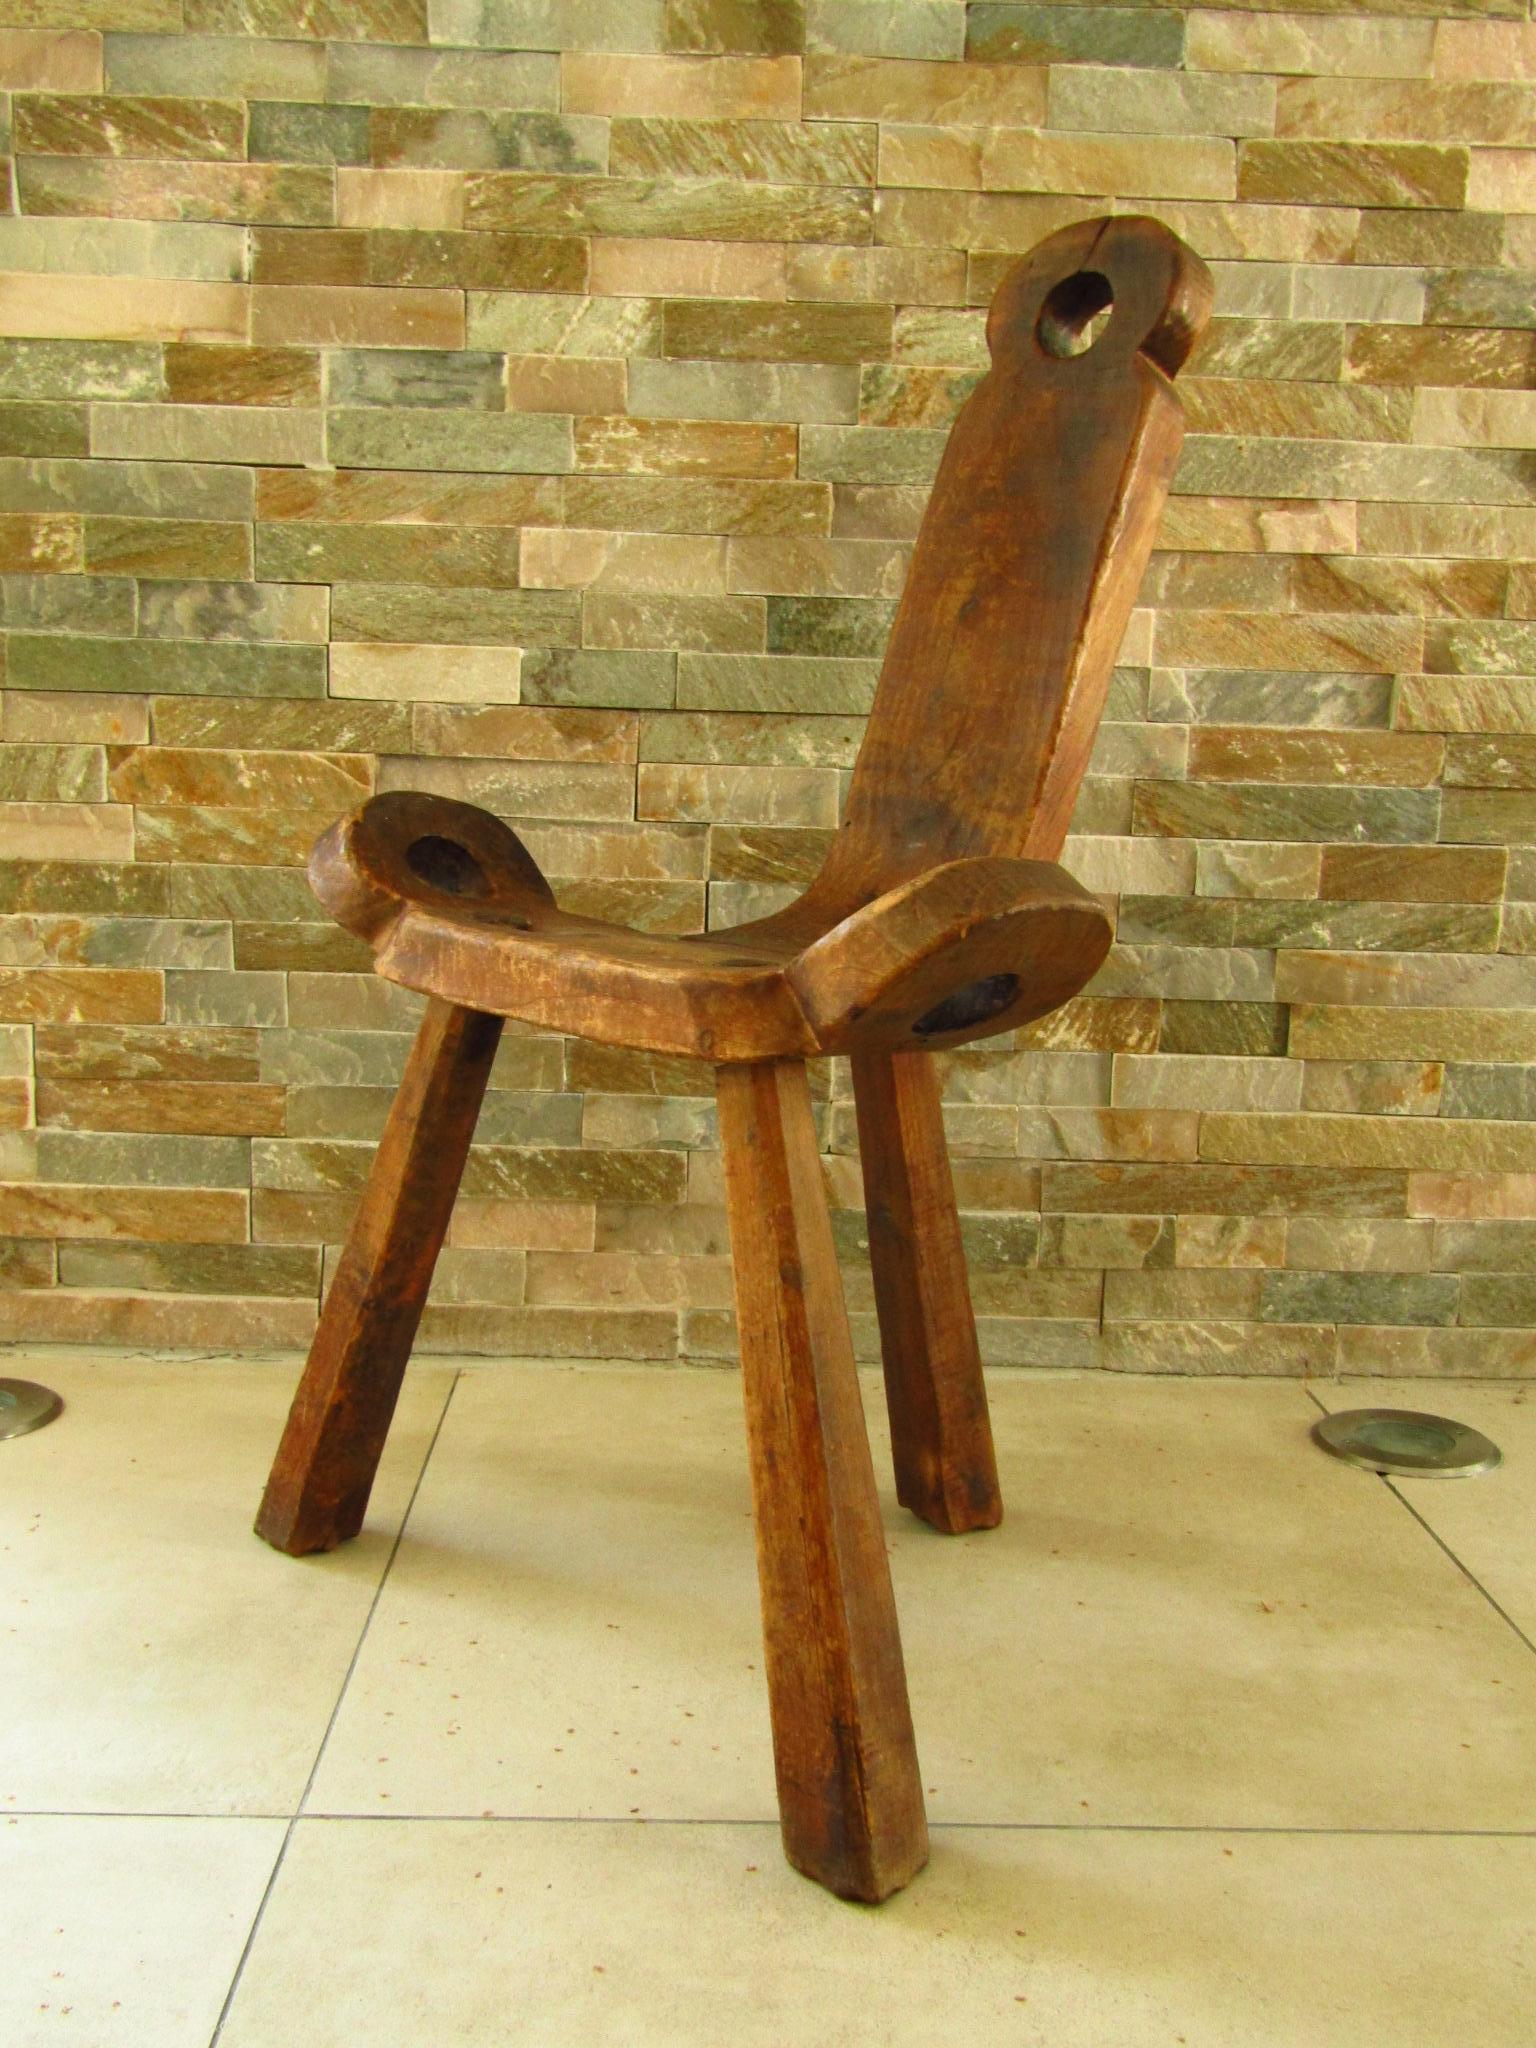 Primitive rustic birthing chair, Austria 18th century. Solid, stable, unrestored original condition. perfect patina!

 